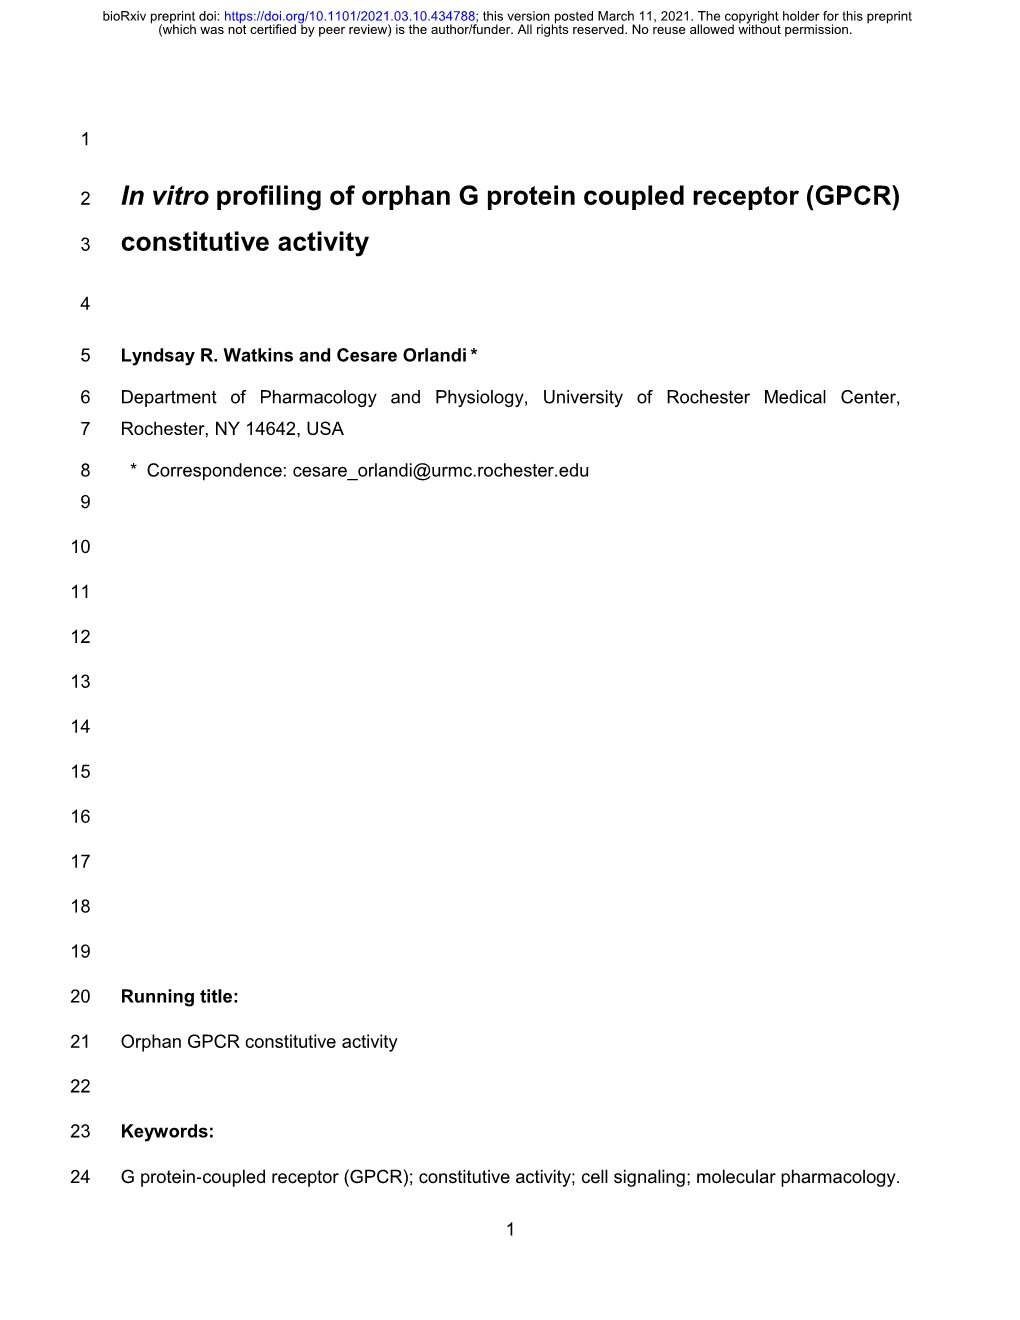 In Vitro Profiling of Orphan G Protein Coupled Receptor (GPCR)